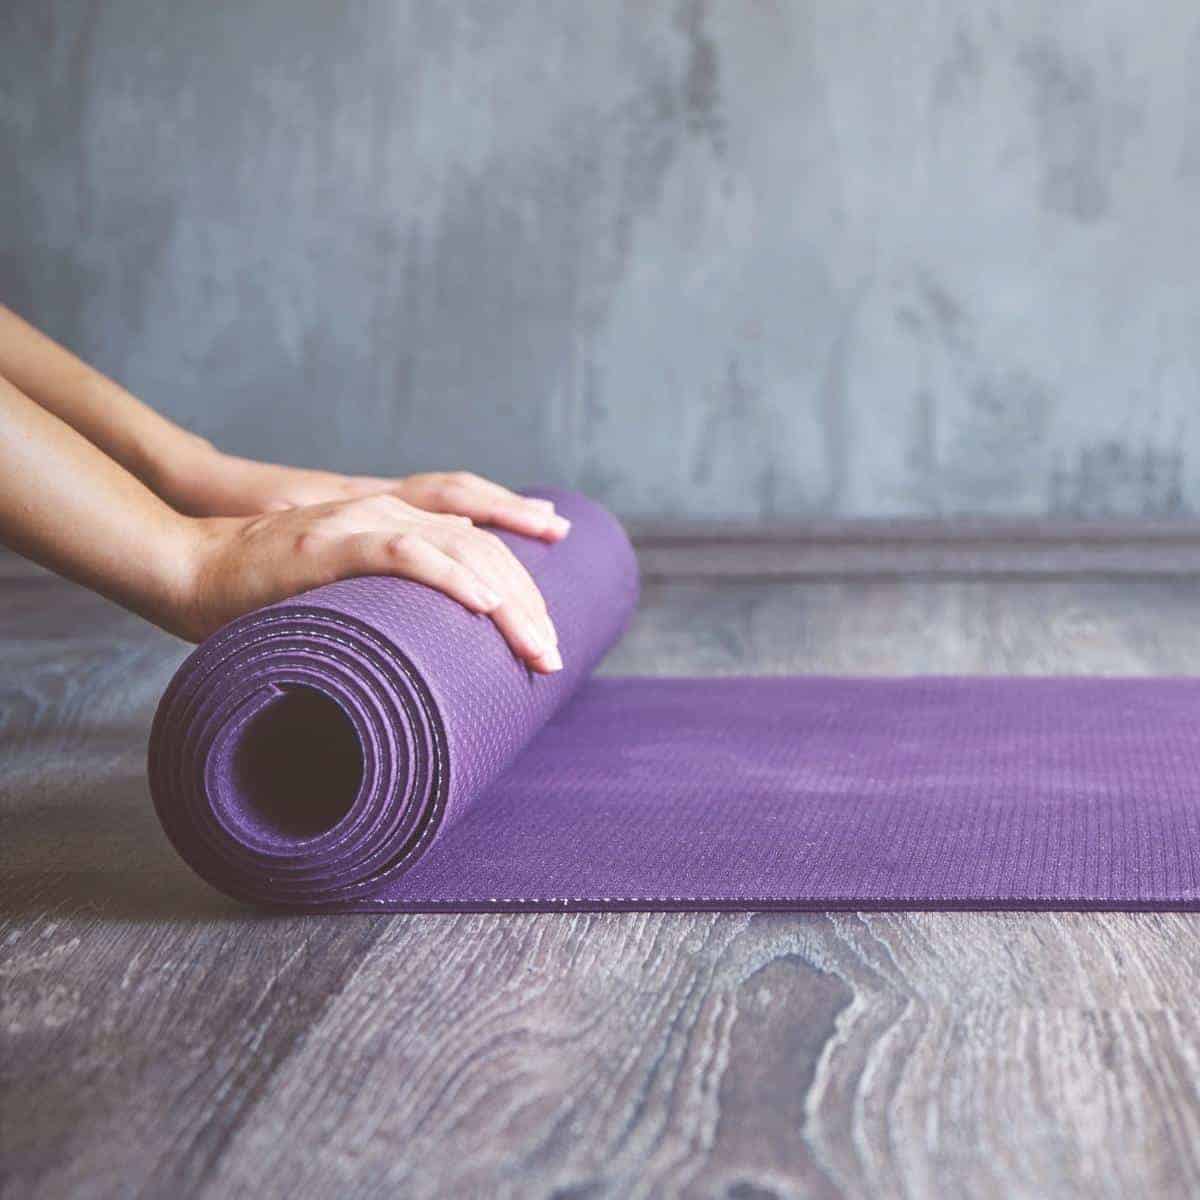 7 Tips on How to Protect Your Hands and Wrists While Doing Yoga